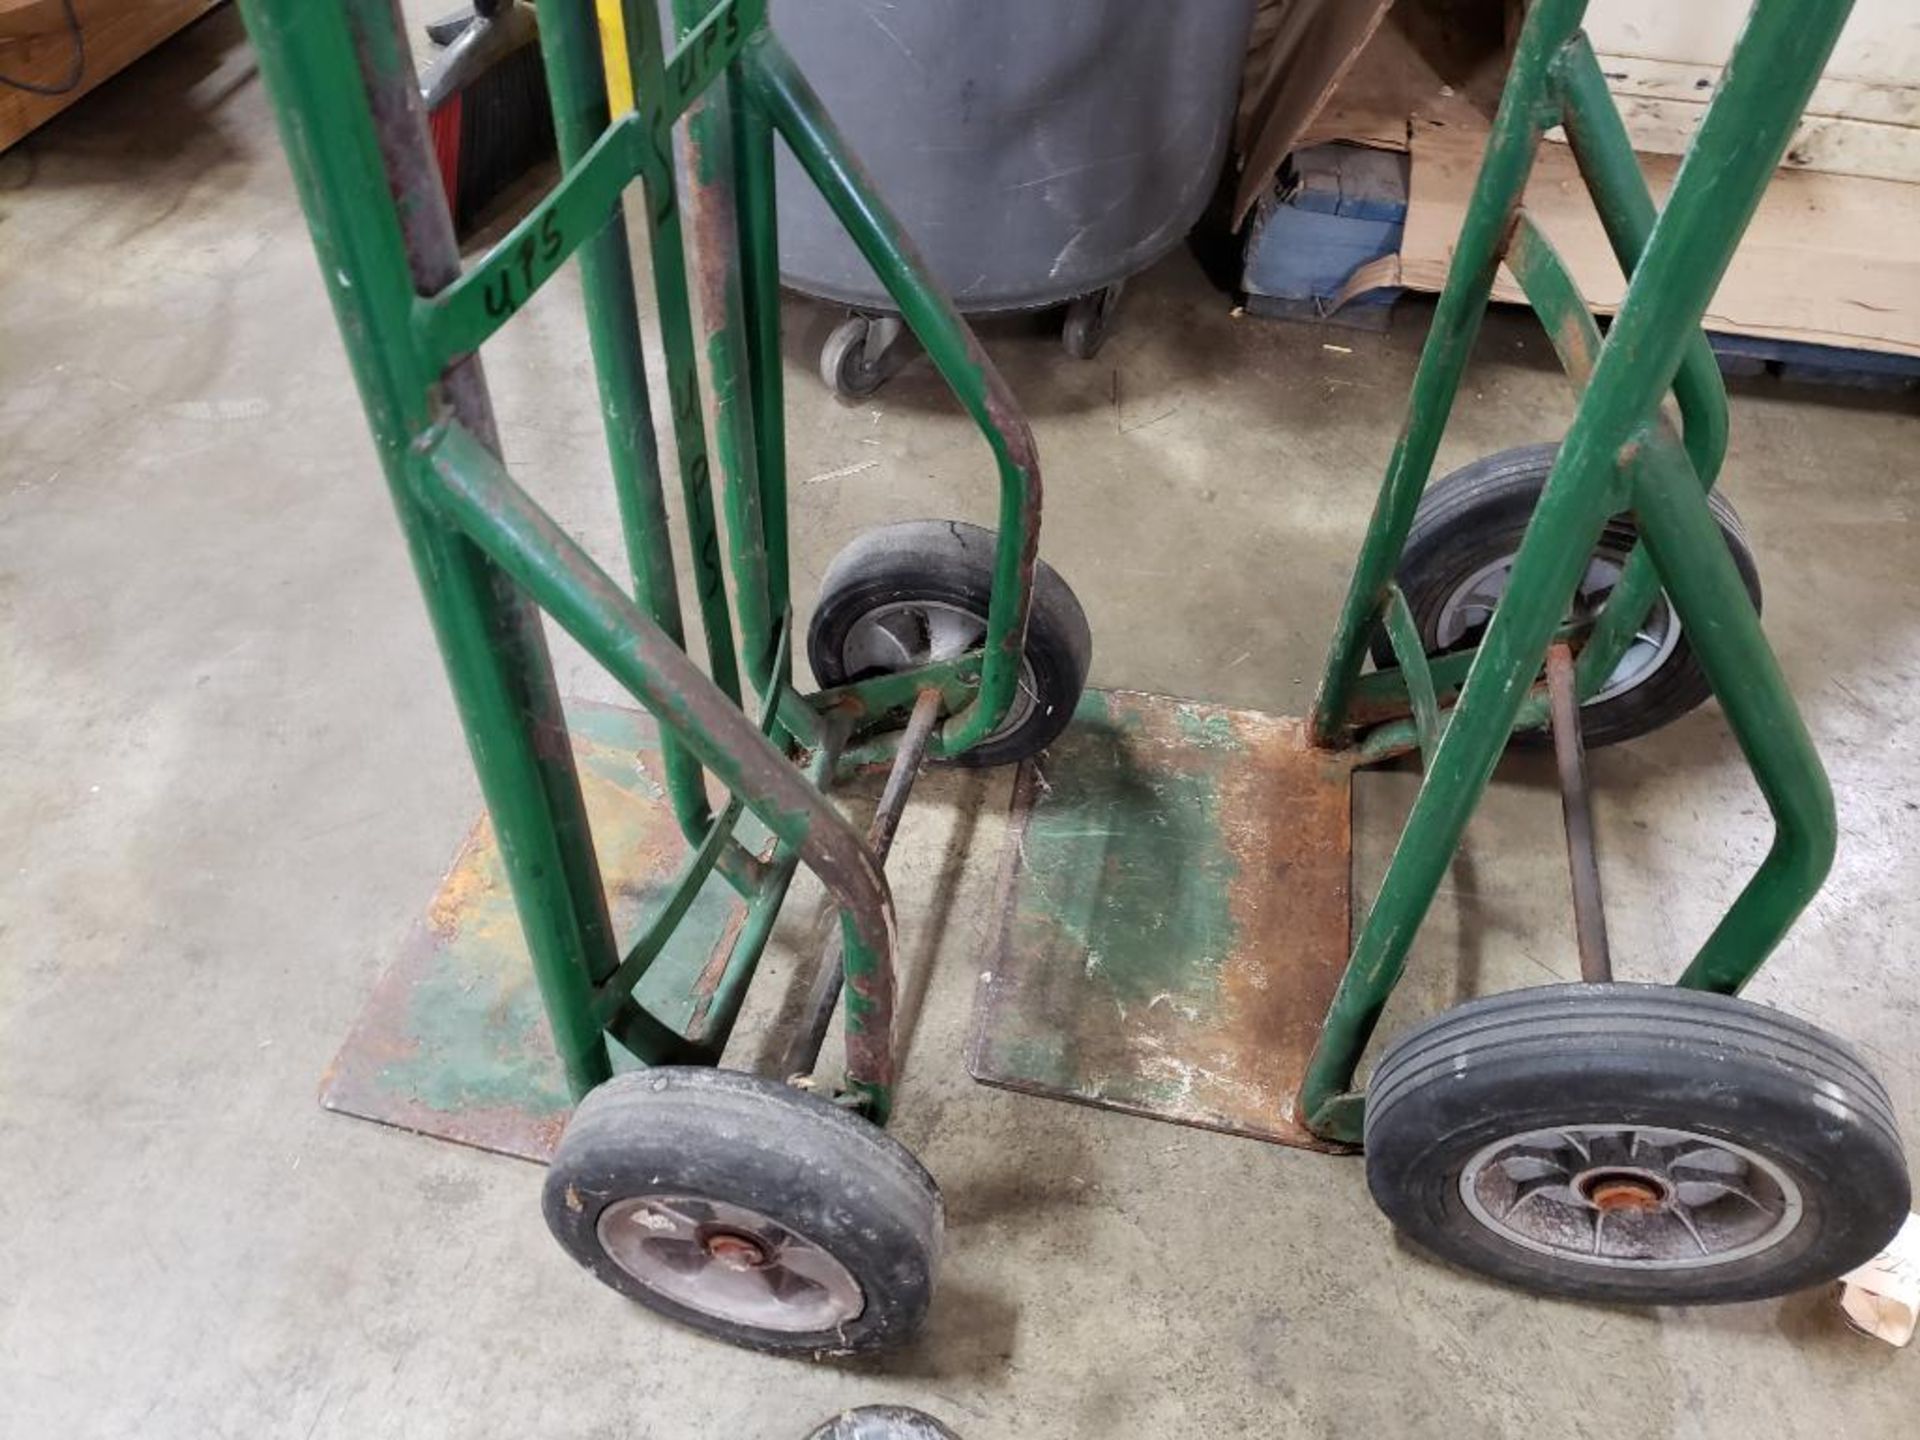 Qty 2 - Assorted hand truck. - Image 4 of 7